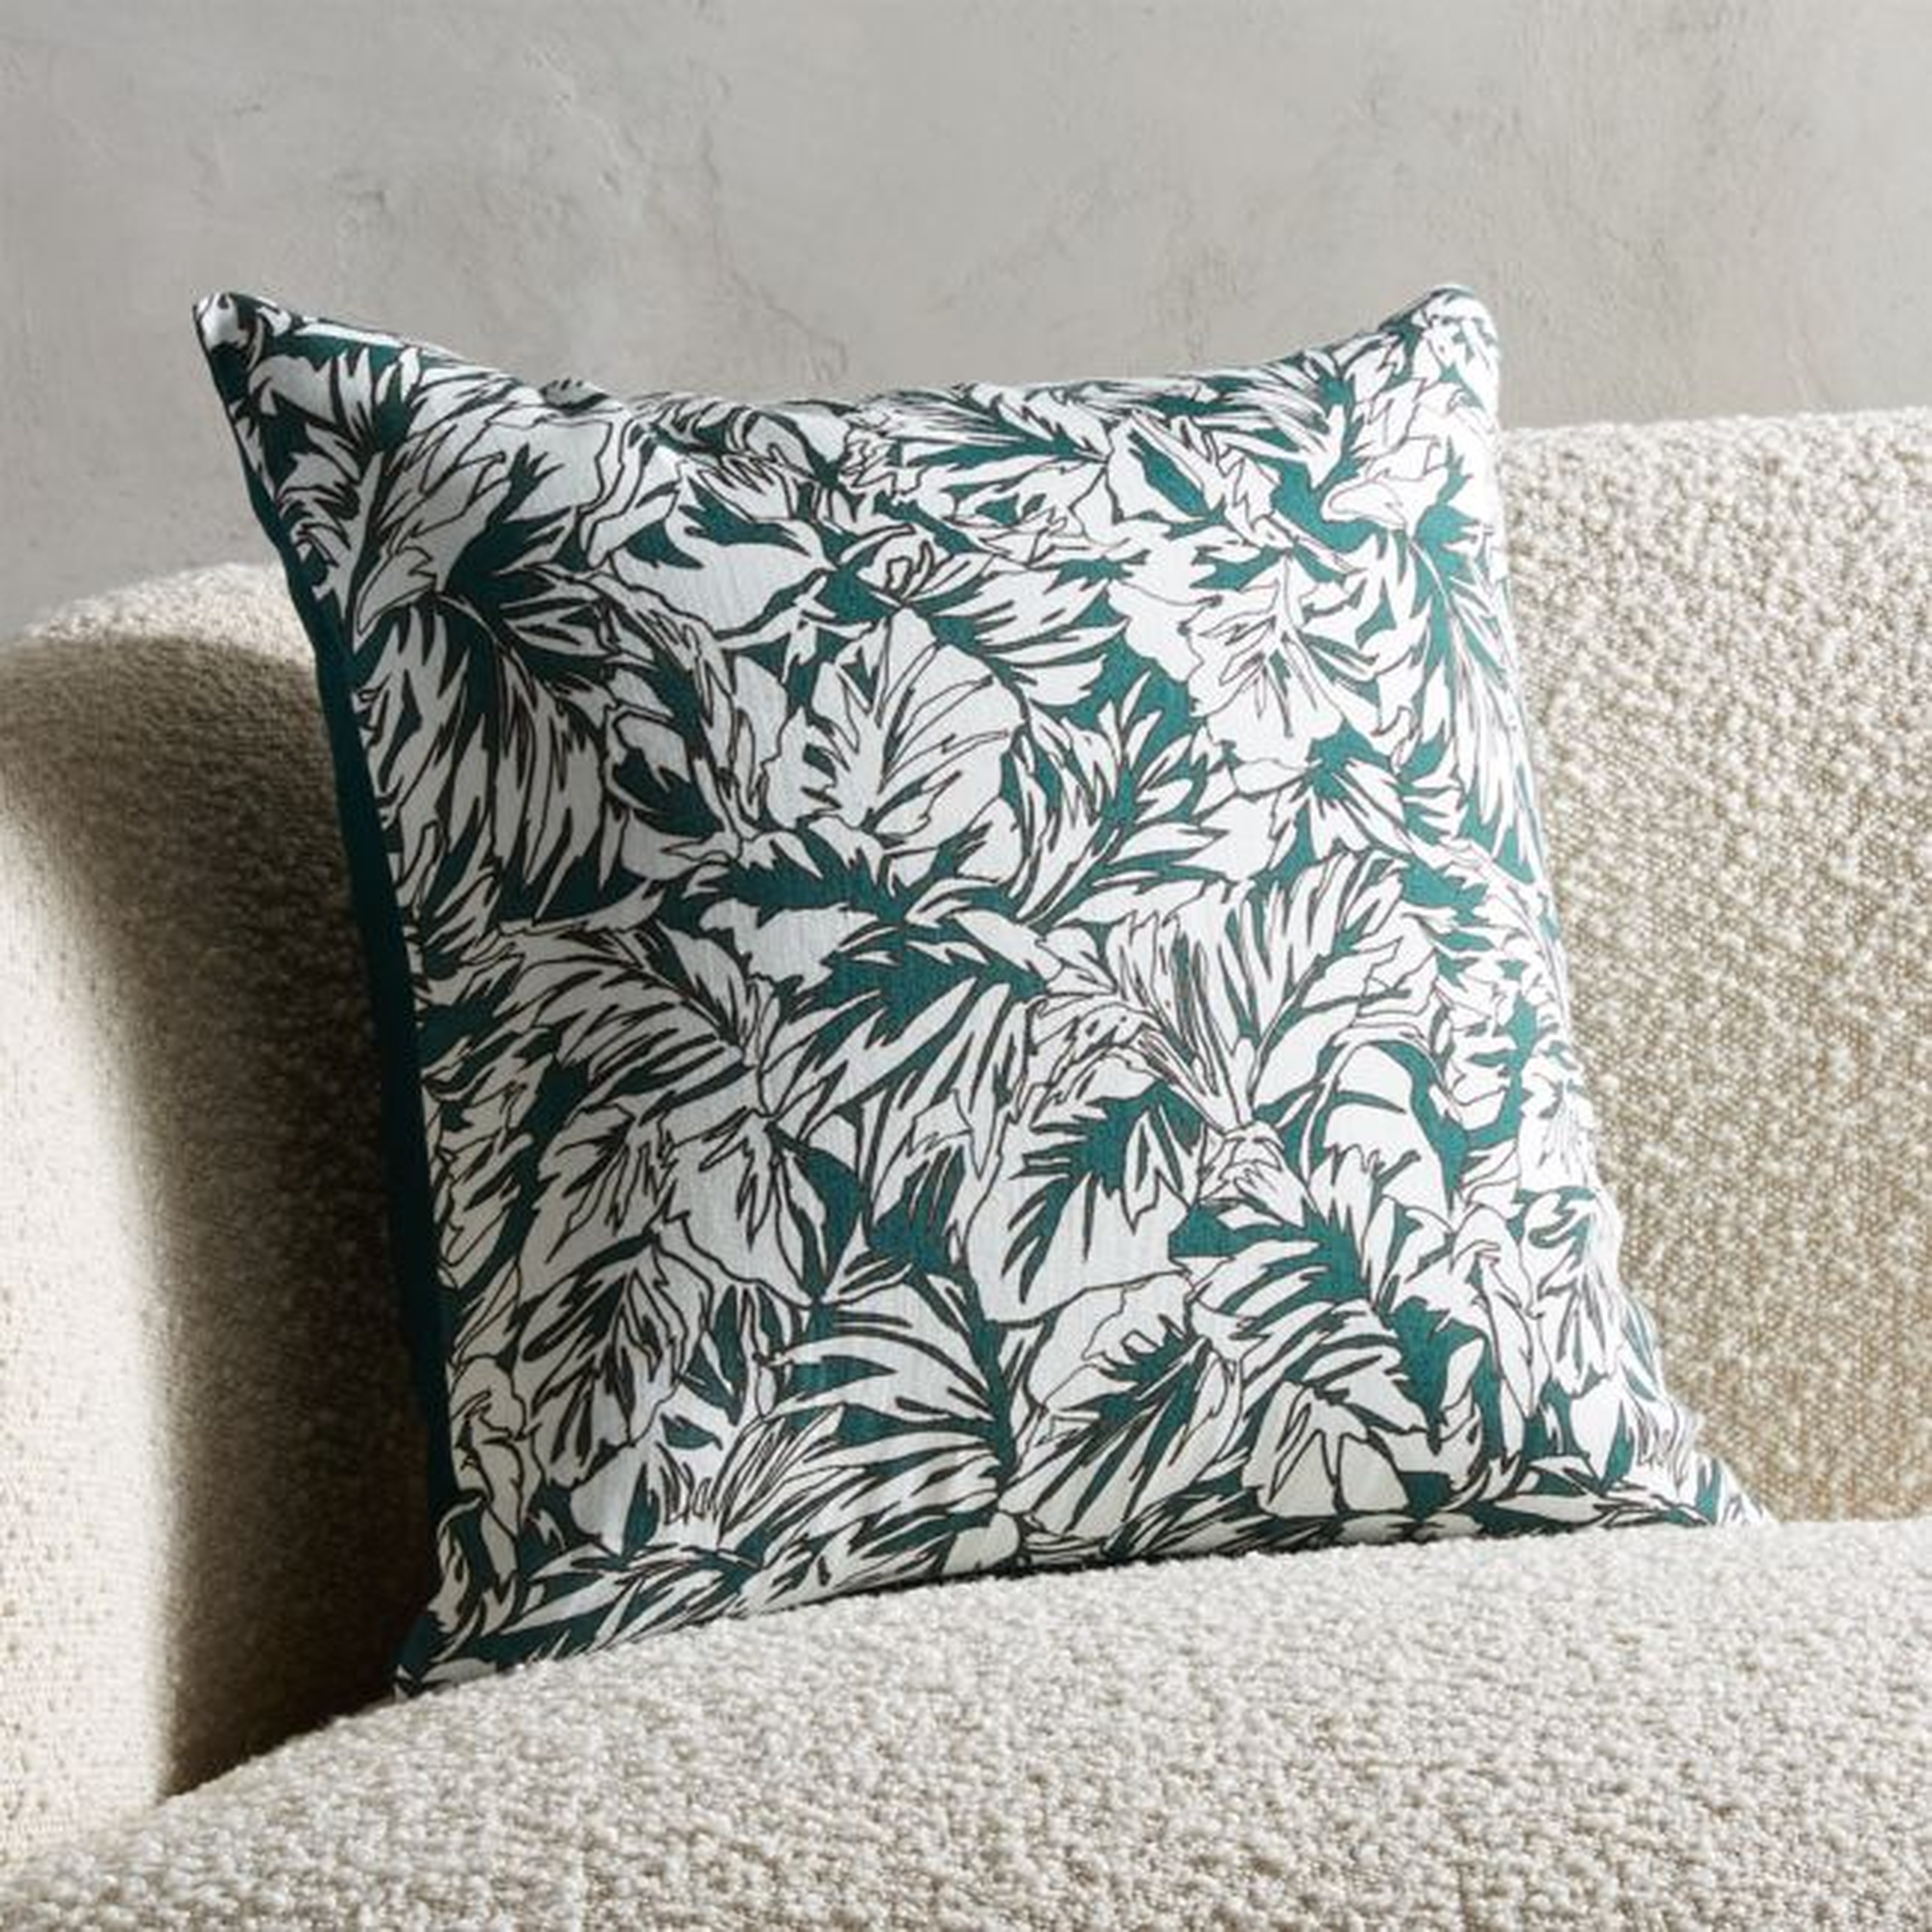 18" Palm Linen Evergreen Pillow with Feather-Down Insert - CB2